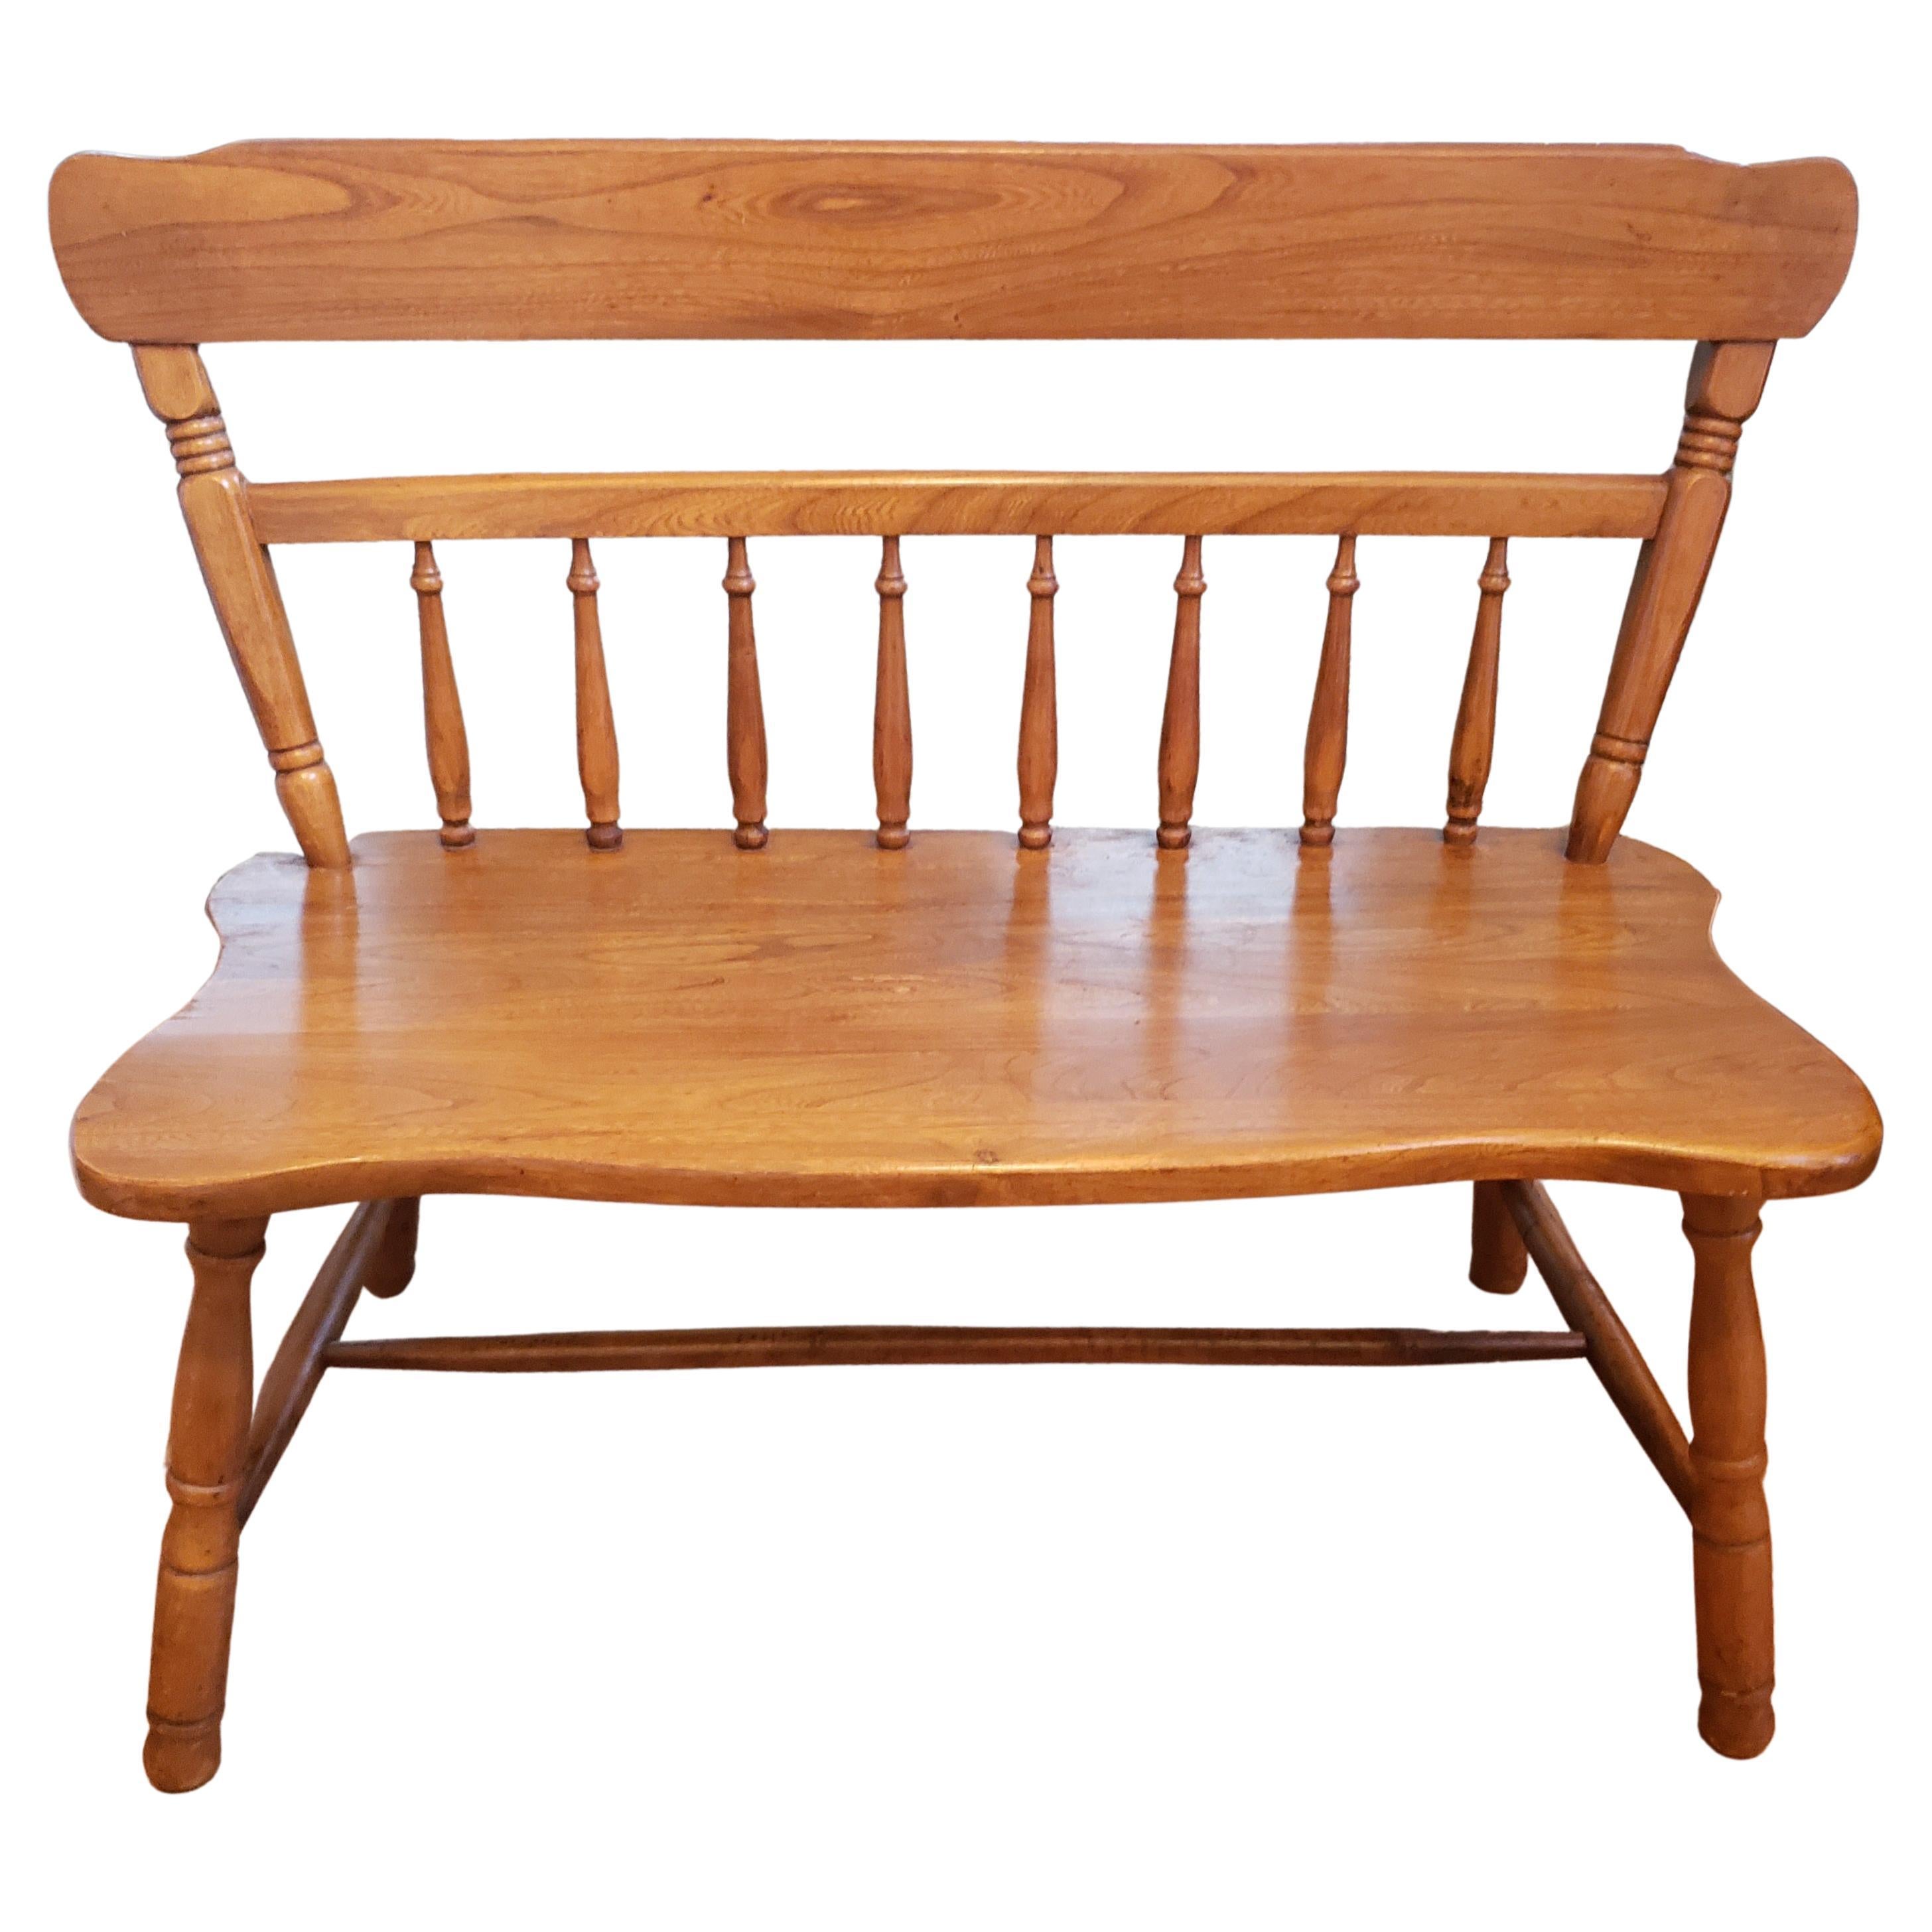 Solid Red Oak Farm House Style Two-Seat Bench Settee, Circa 1970s